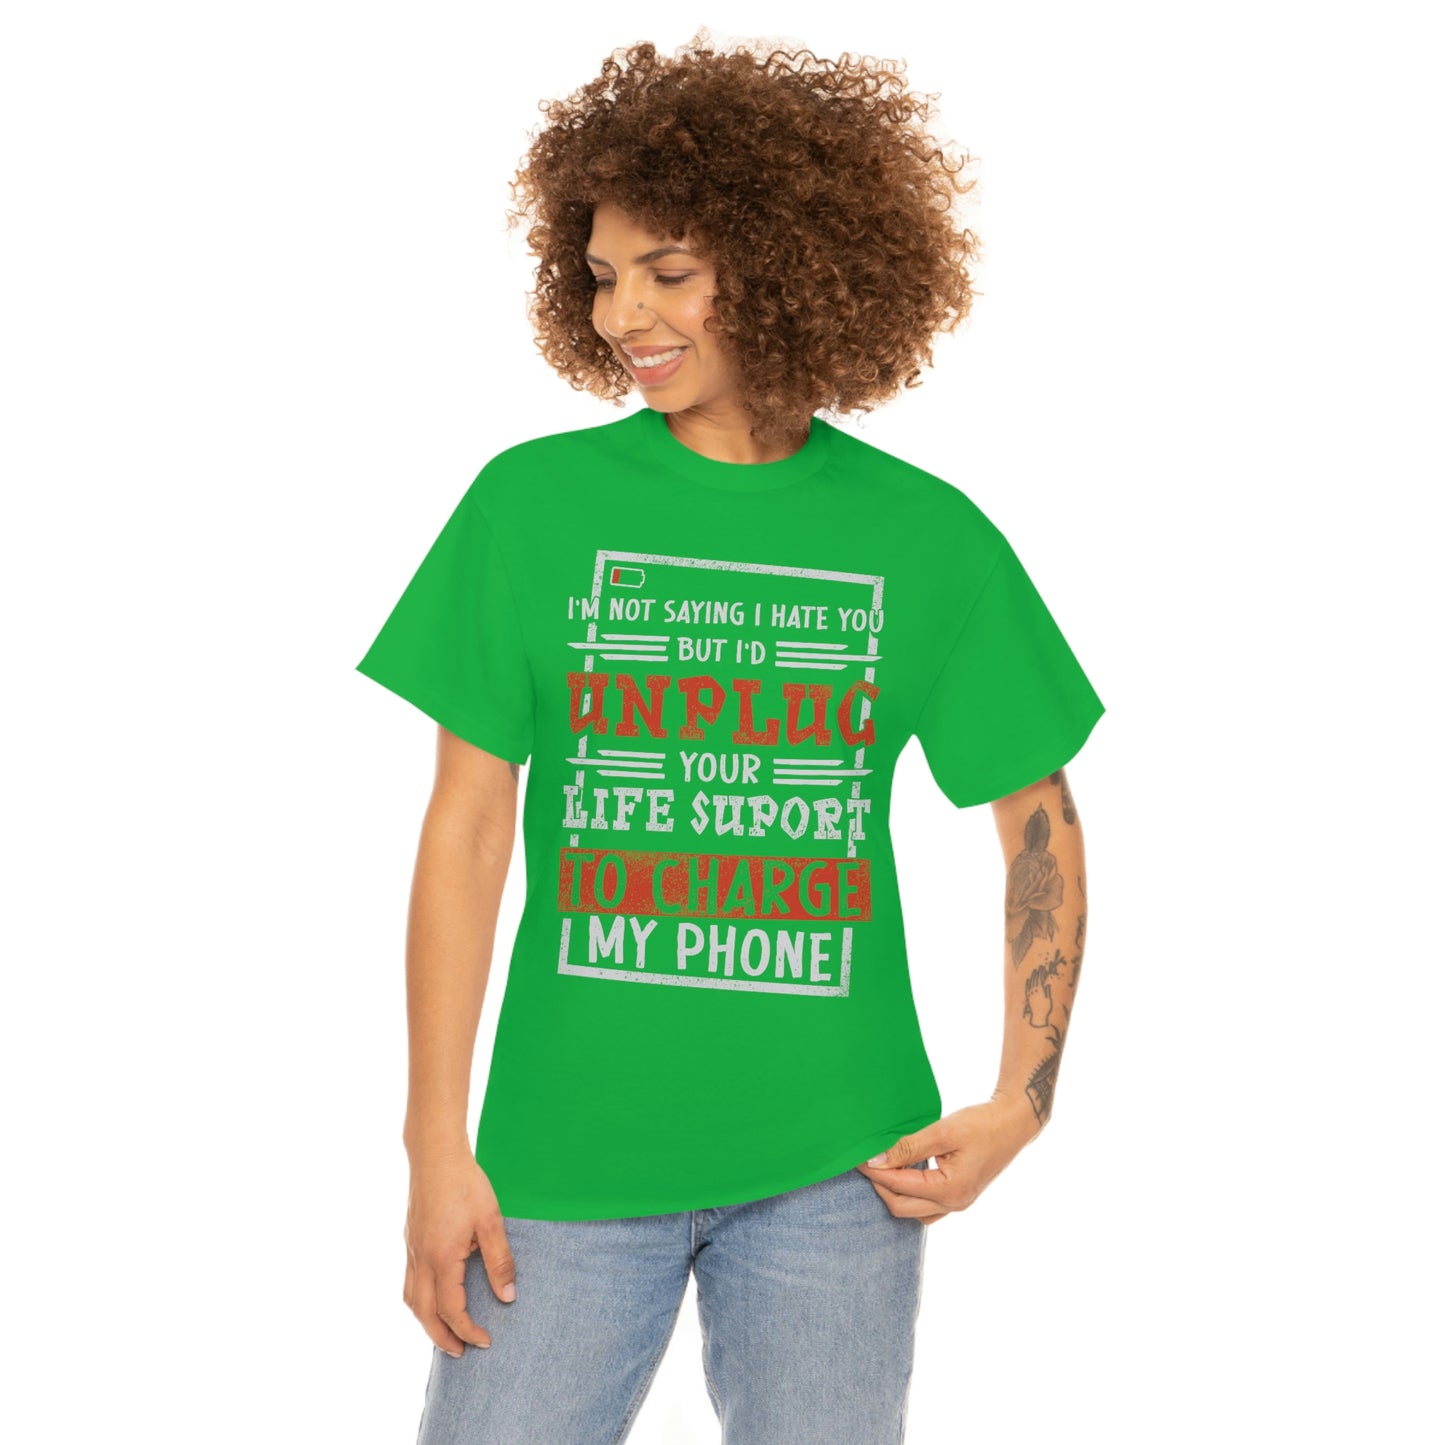 I'm Not Saying I Hate You But I'd Unplug Your Life Support to Charge My Phone Cotton Tee